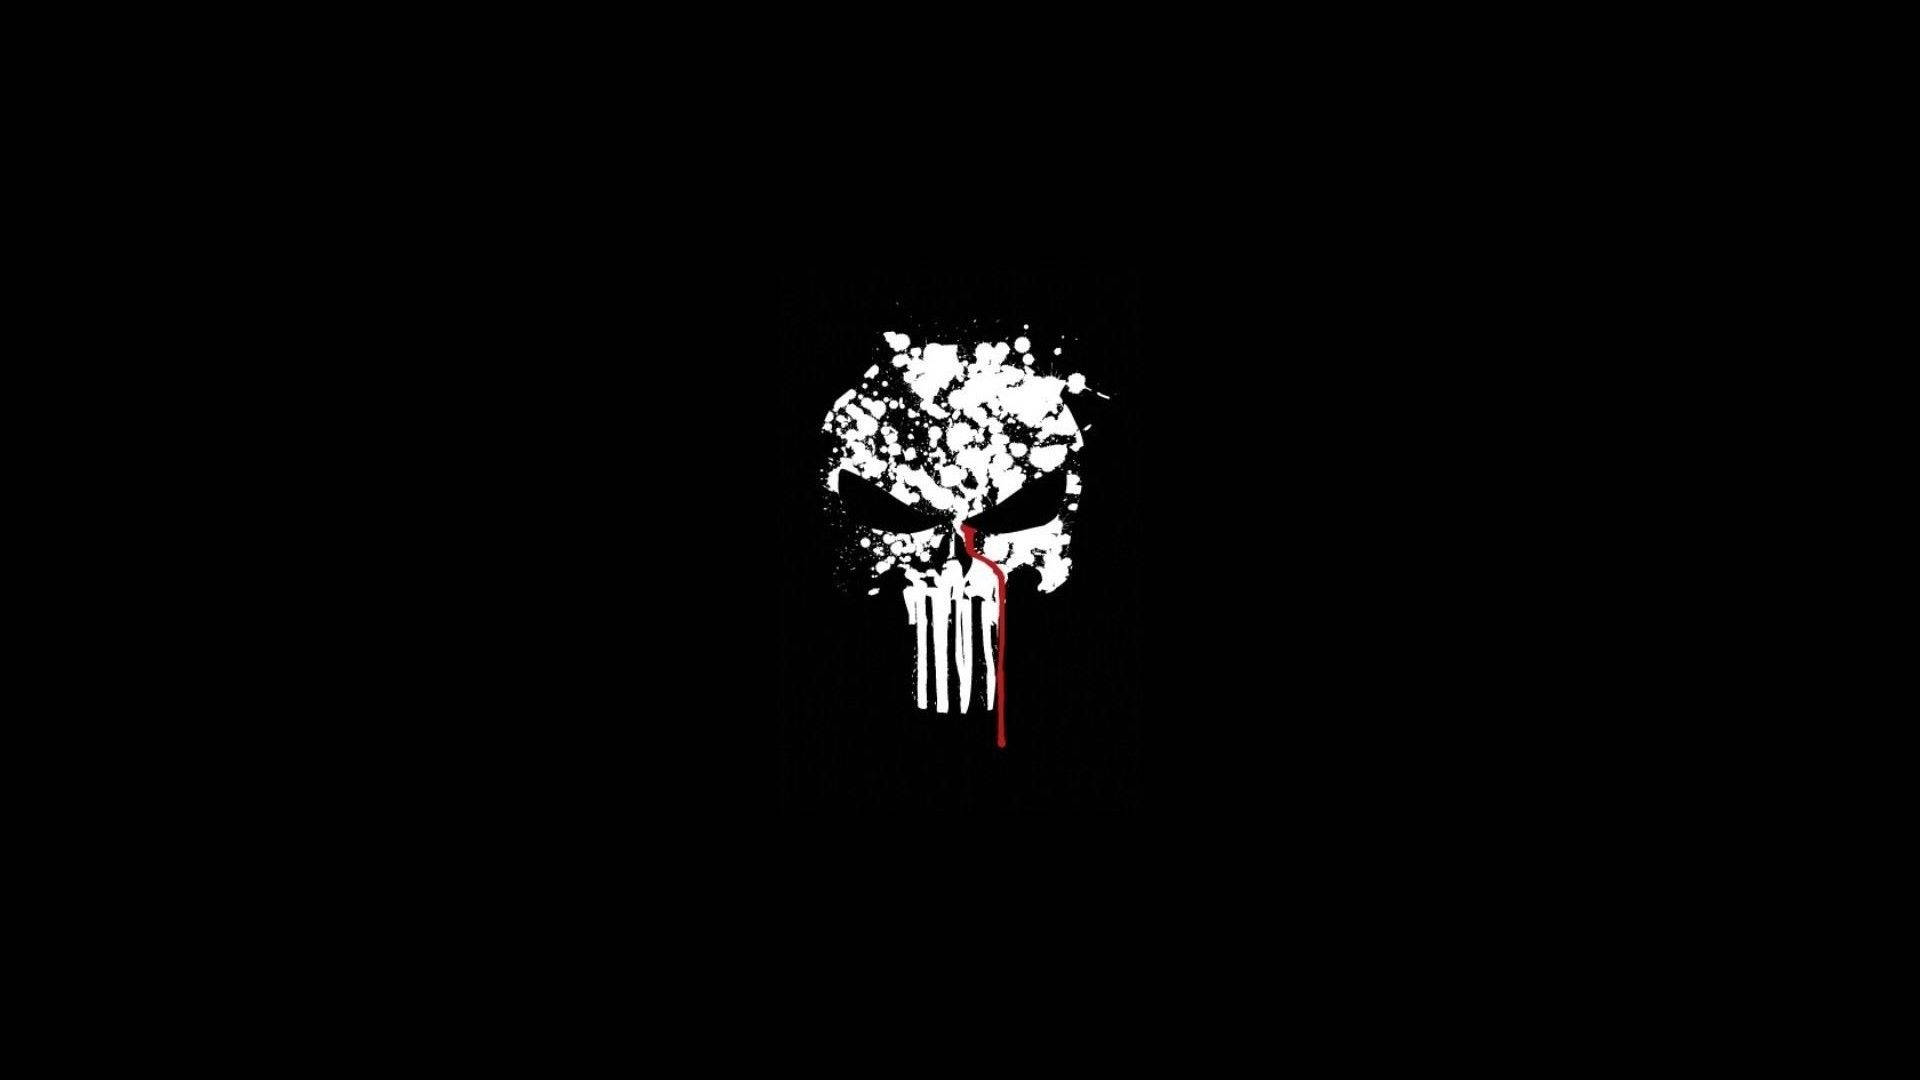 Punisher Logo In Paint Drops Background